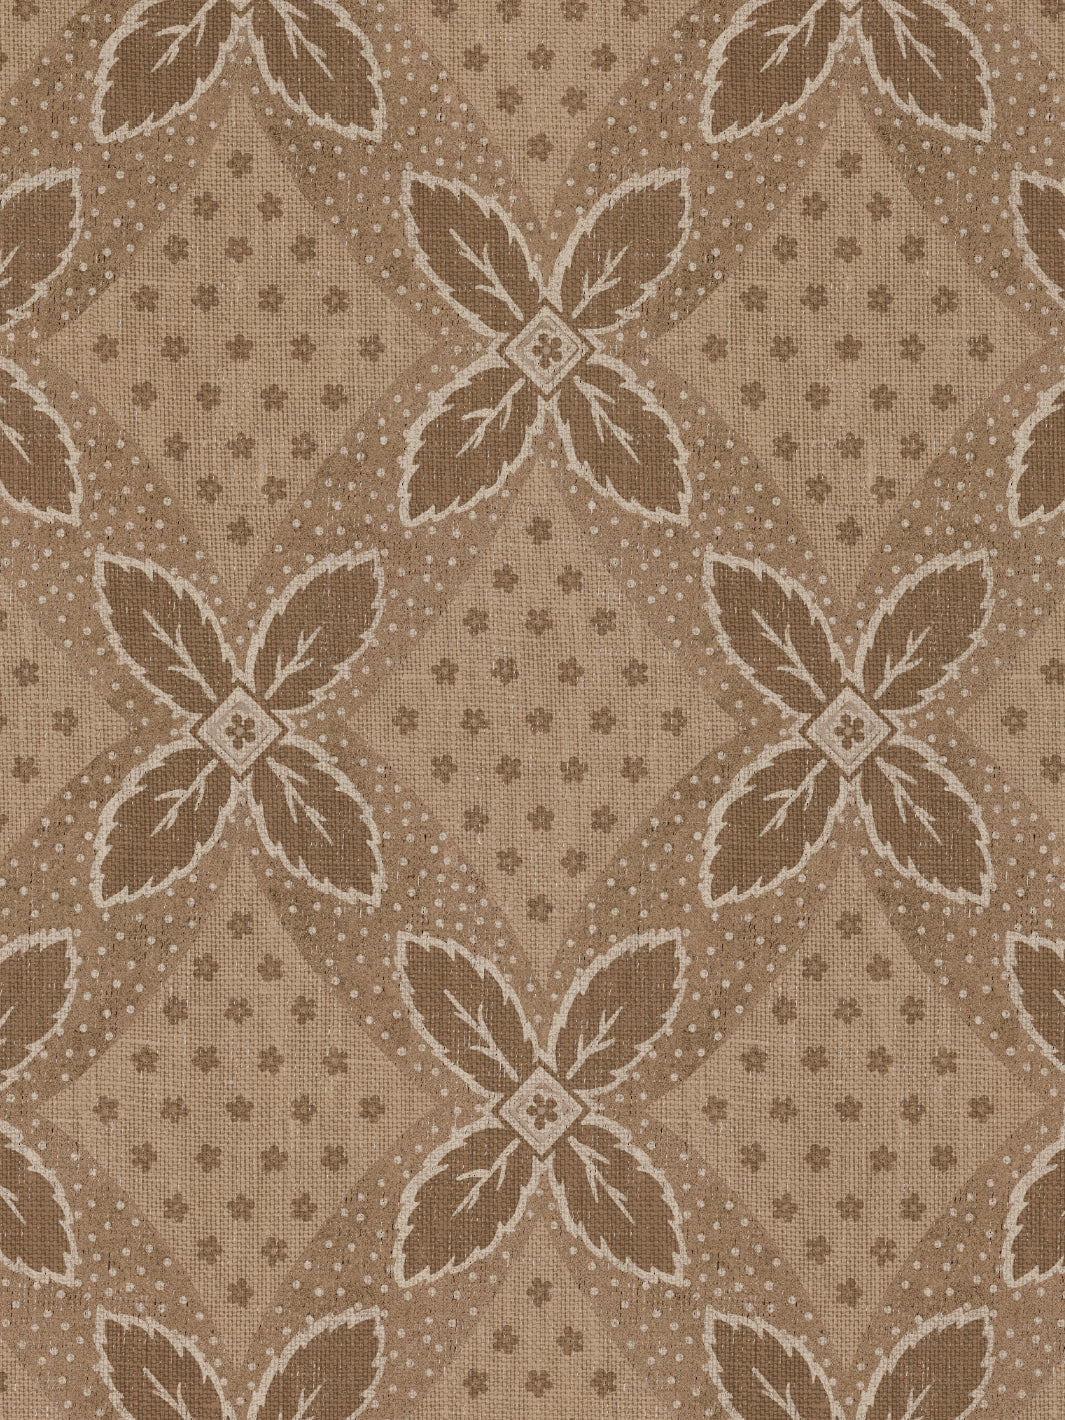 'Arthur' Linen Fabric by Nathan Turner - Neutral